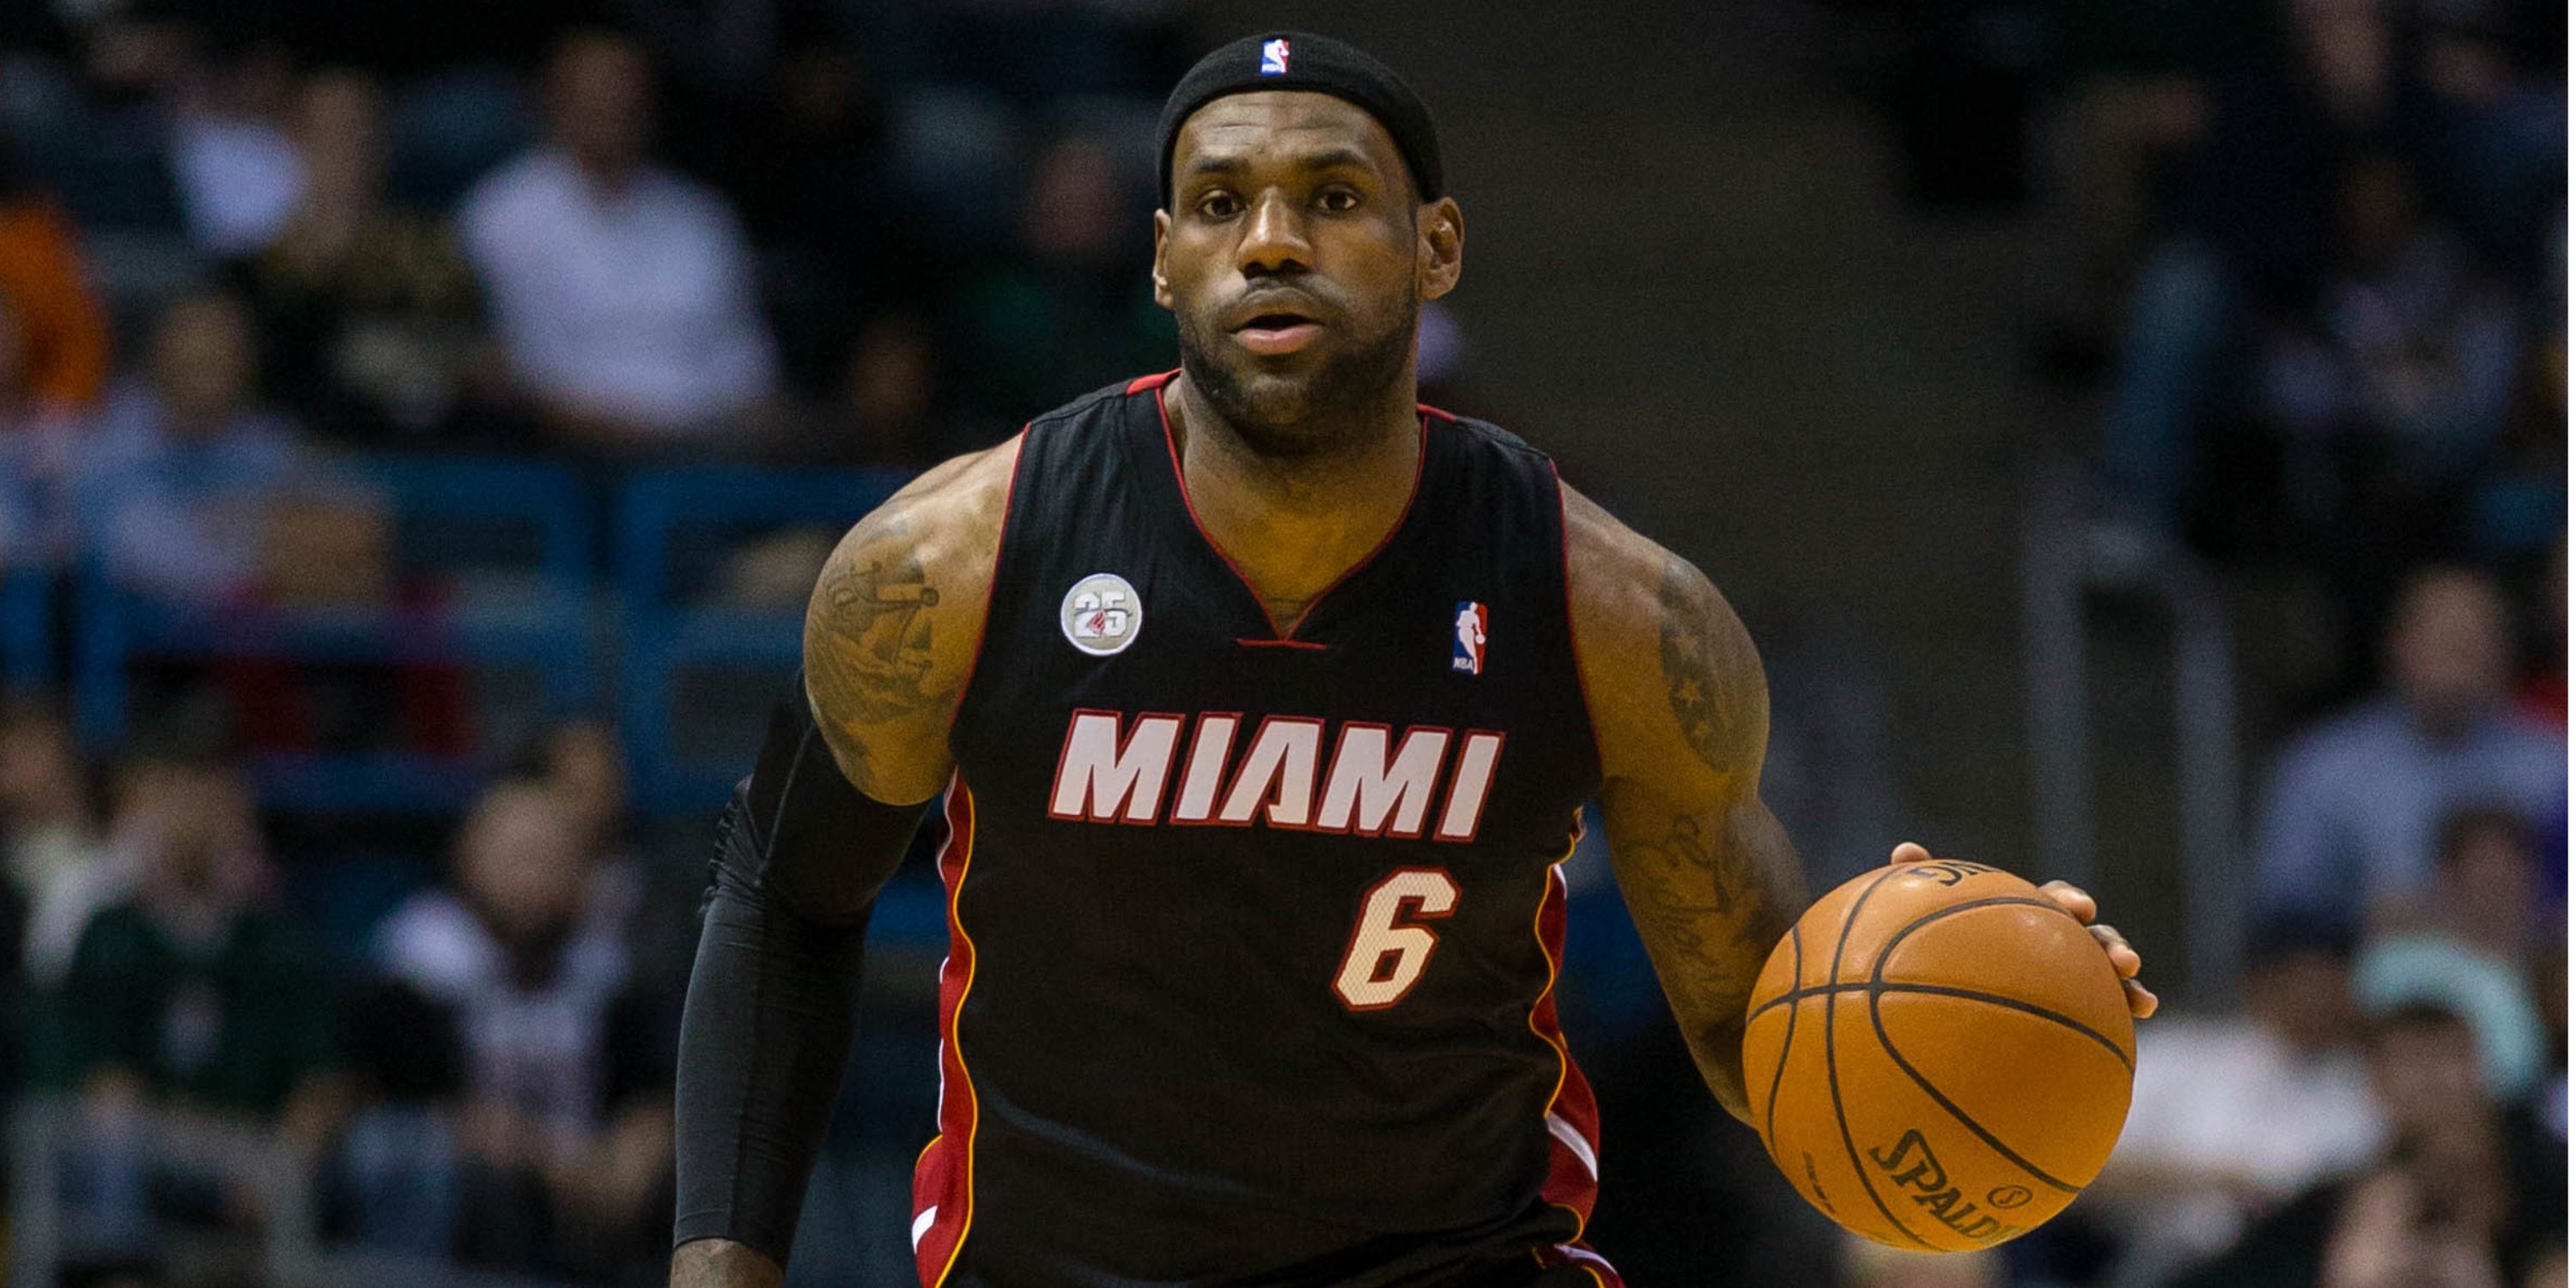 LeBron James in a Heat jersey